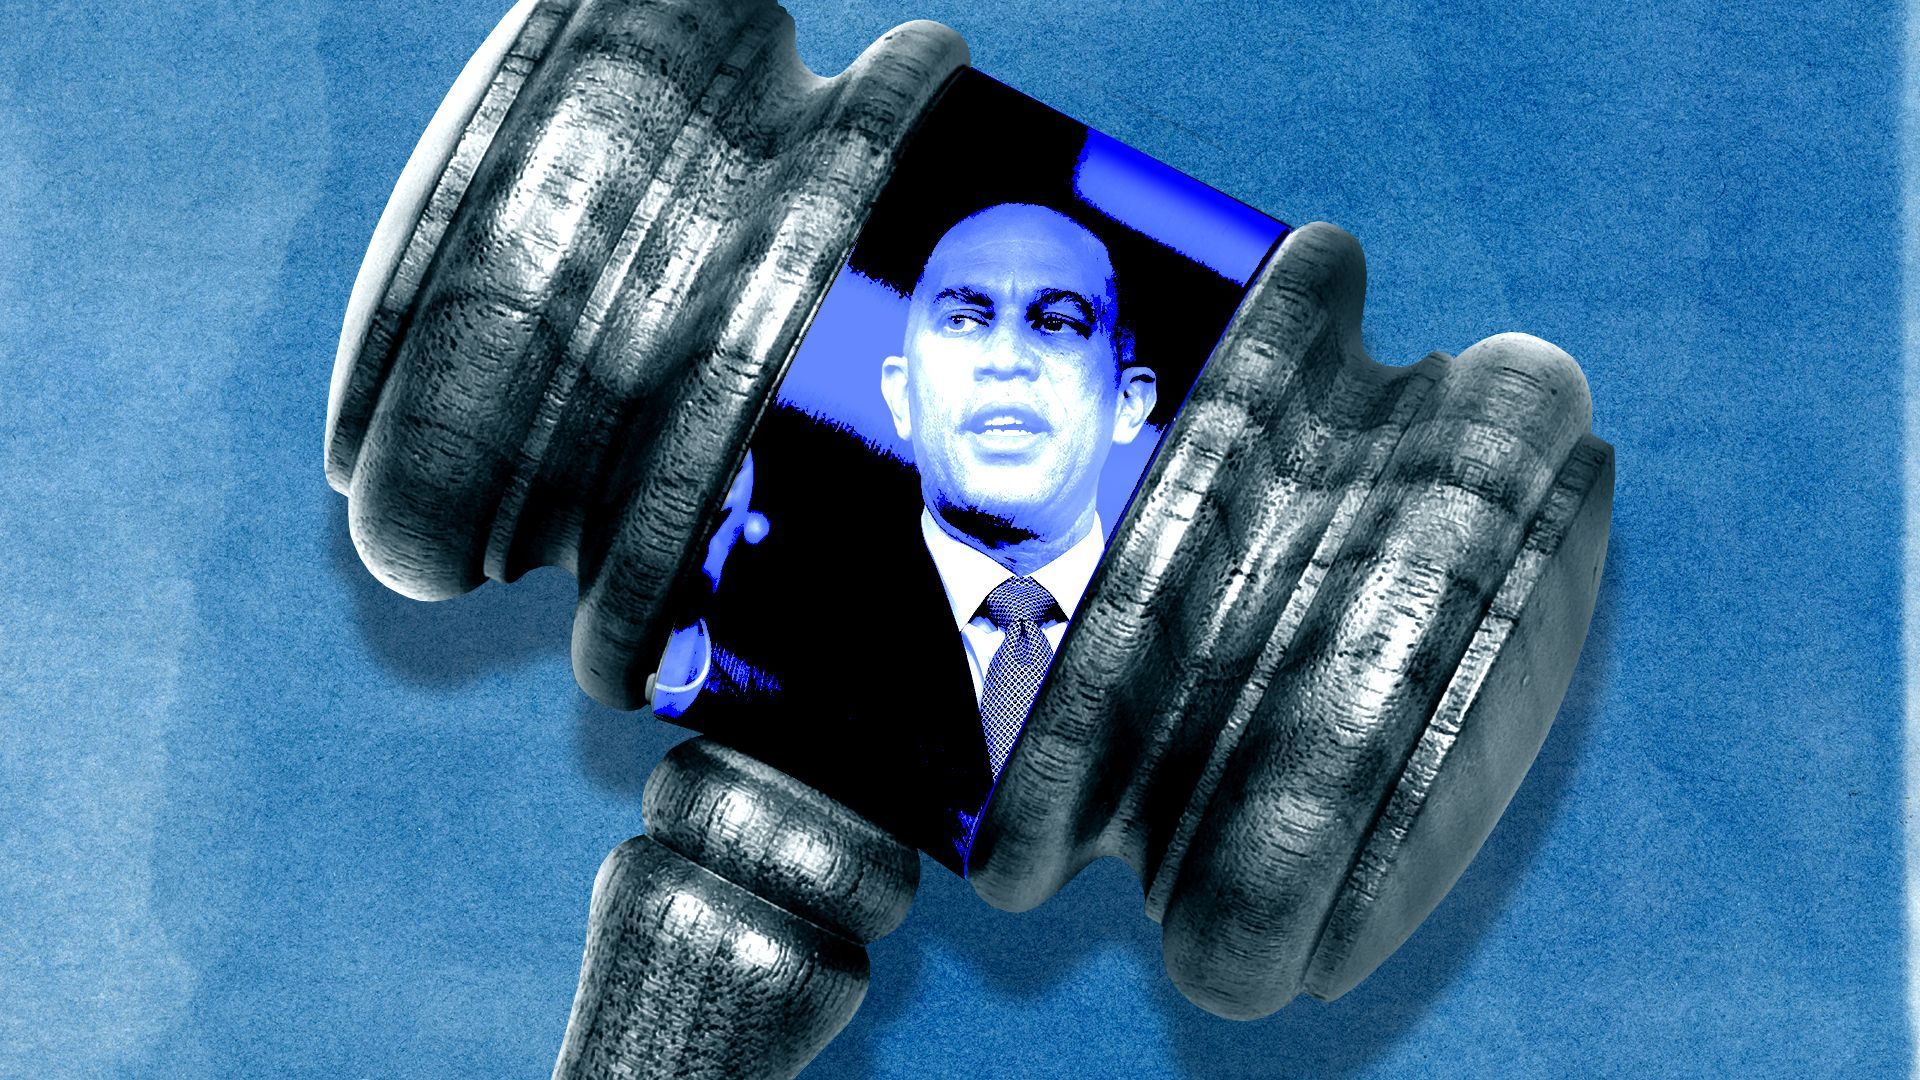 Photo illustration of Hakeem Jeffries reflected in a gavel's metal sleeve.